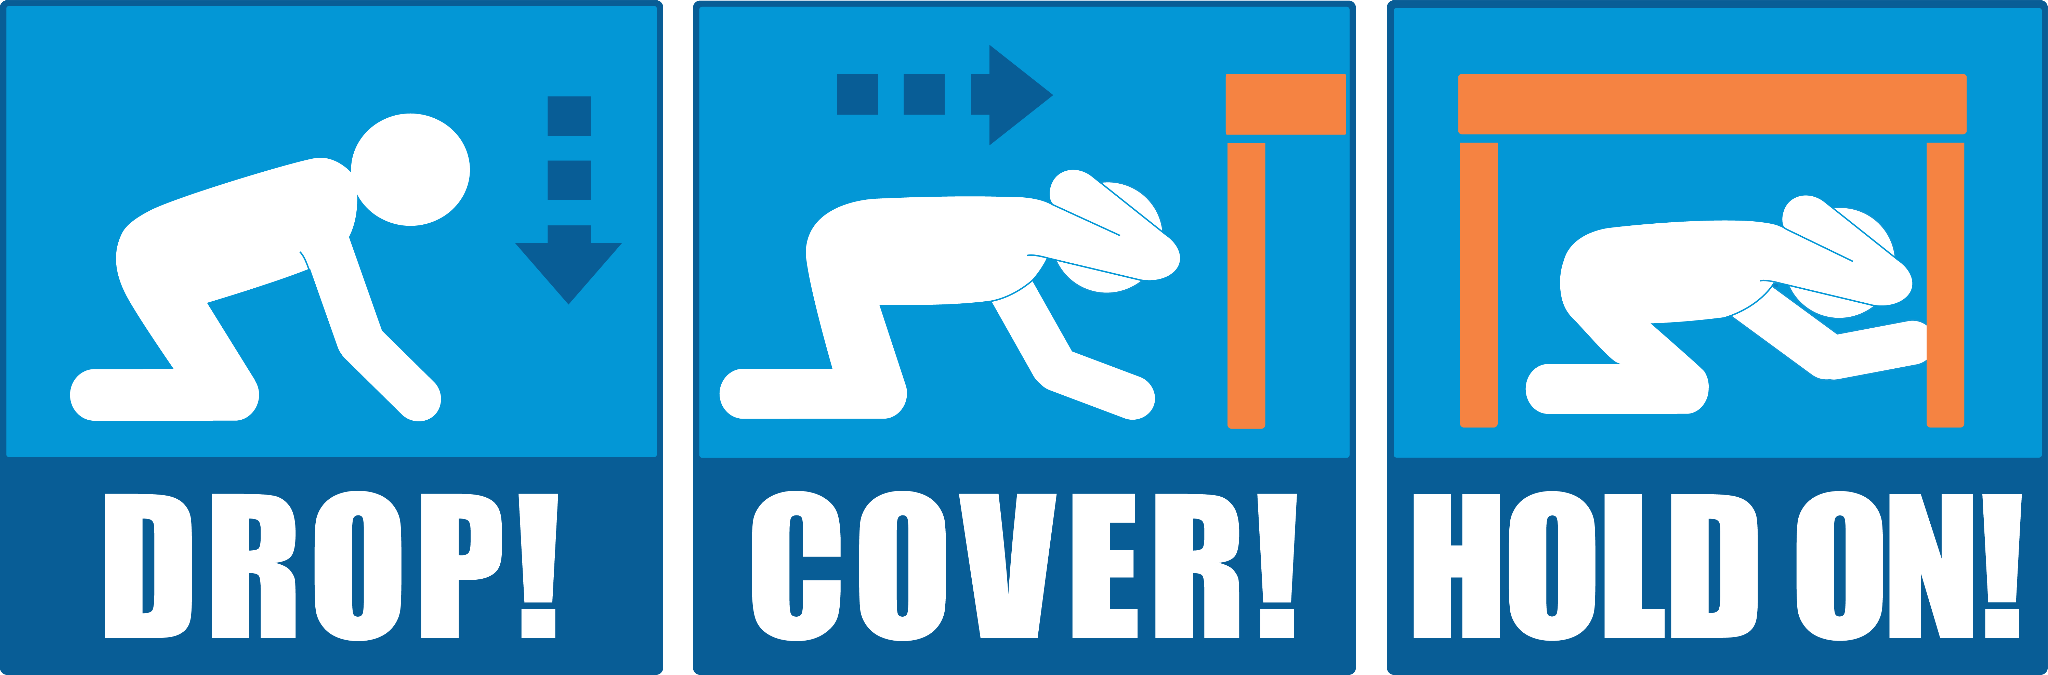 A set of 3 pictograms depicts a figure performing actions: drop, cover, and hold on. 